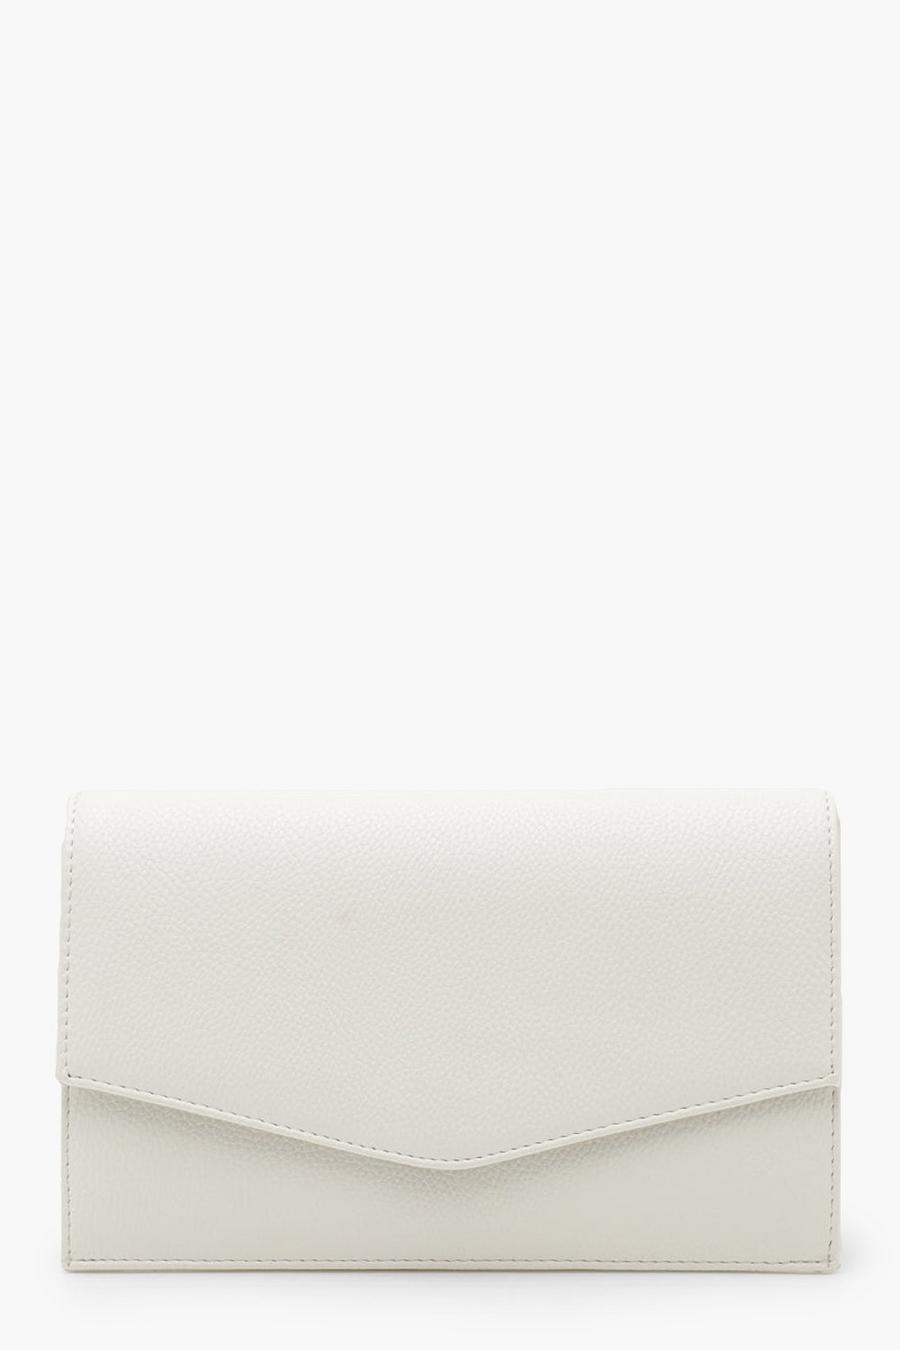 White bianco Grainy PU Envelope Clutch Bag and Chain